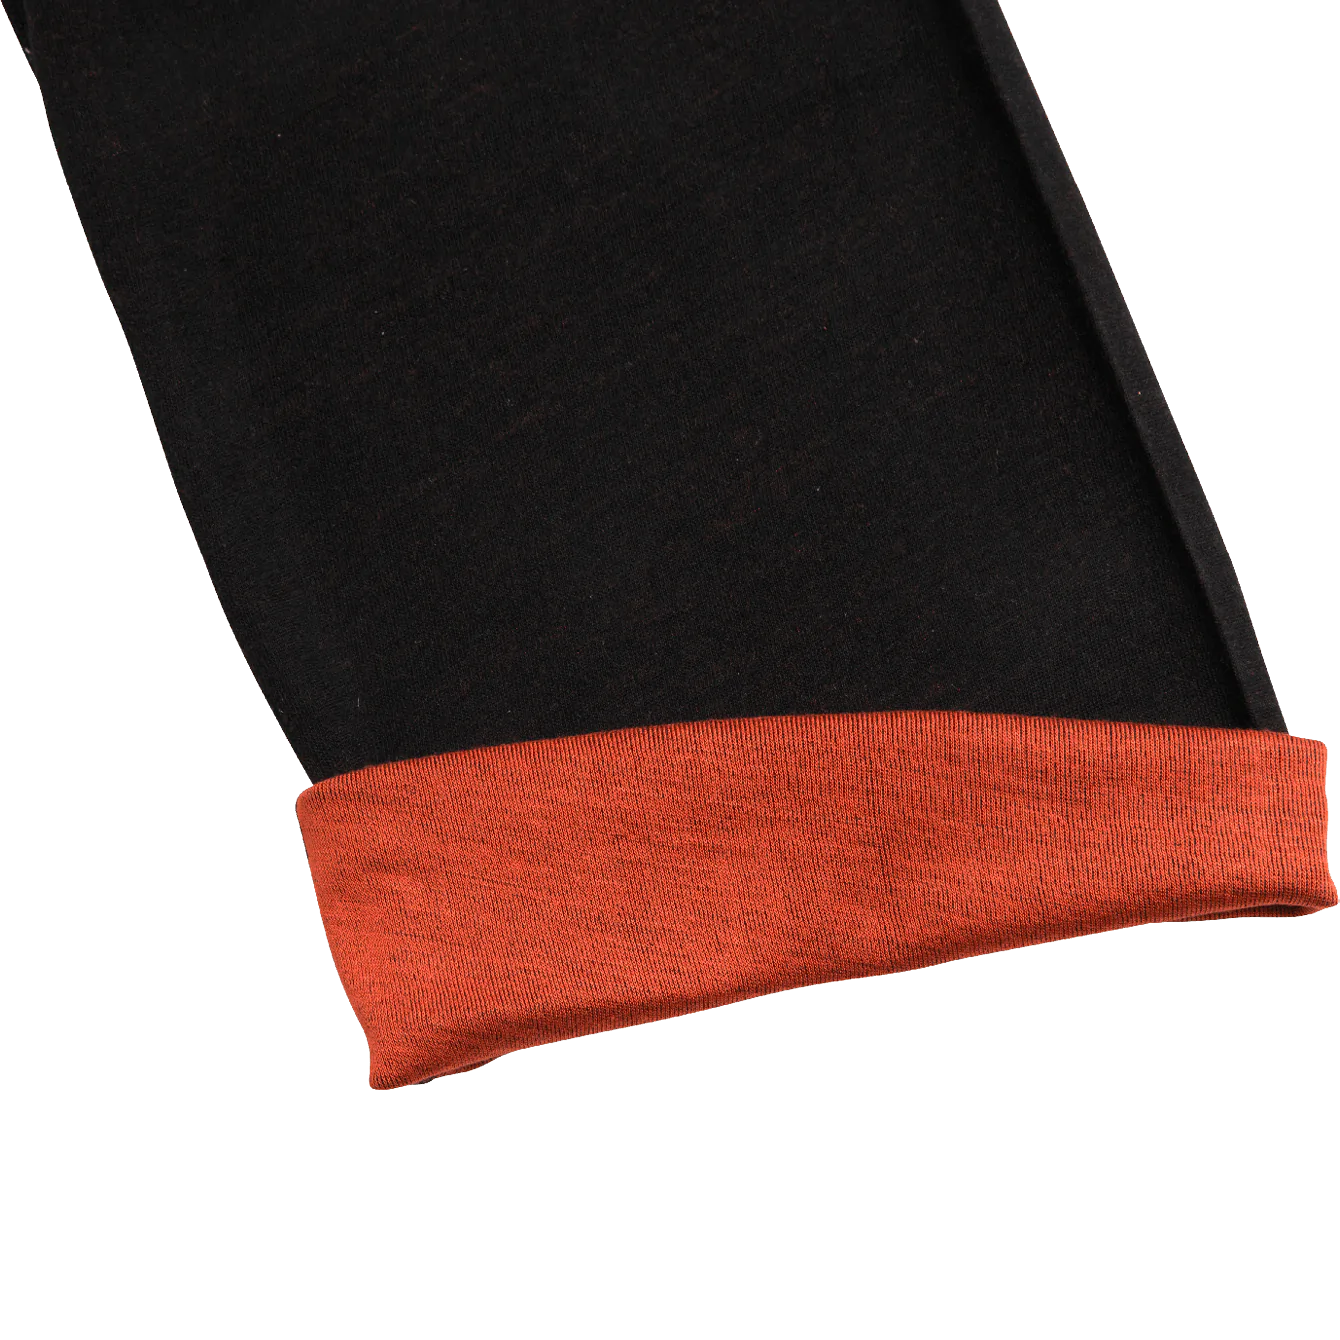 north-outdoor-sensitive-225-adults-tubescarf-black-rust-material-n34003a01_1800x1800